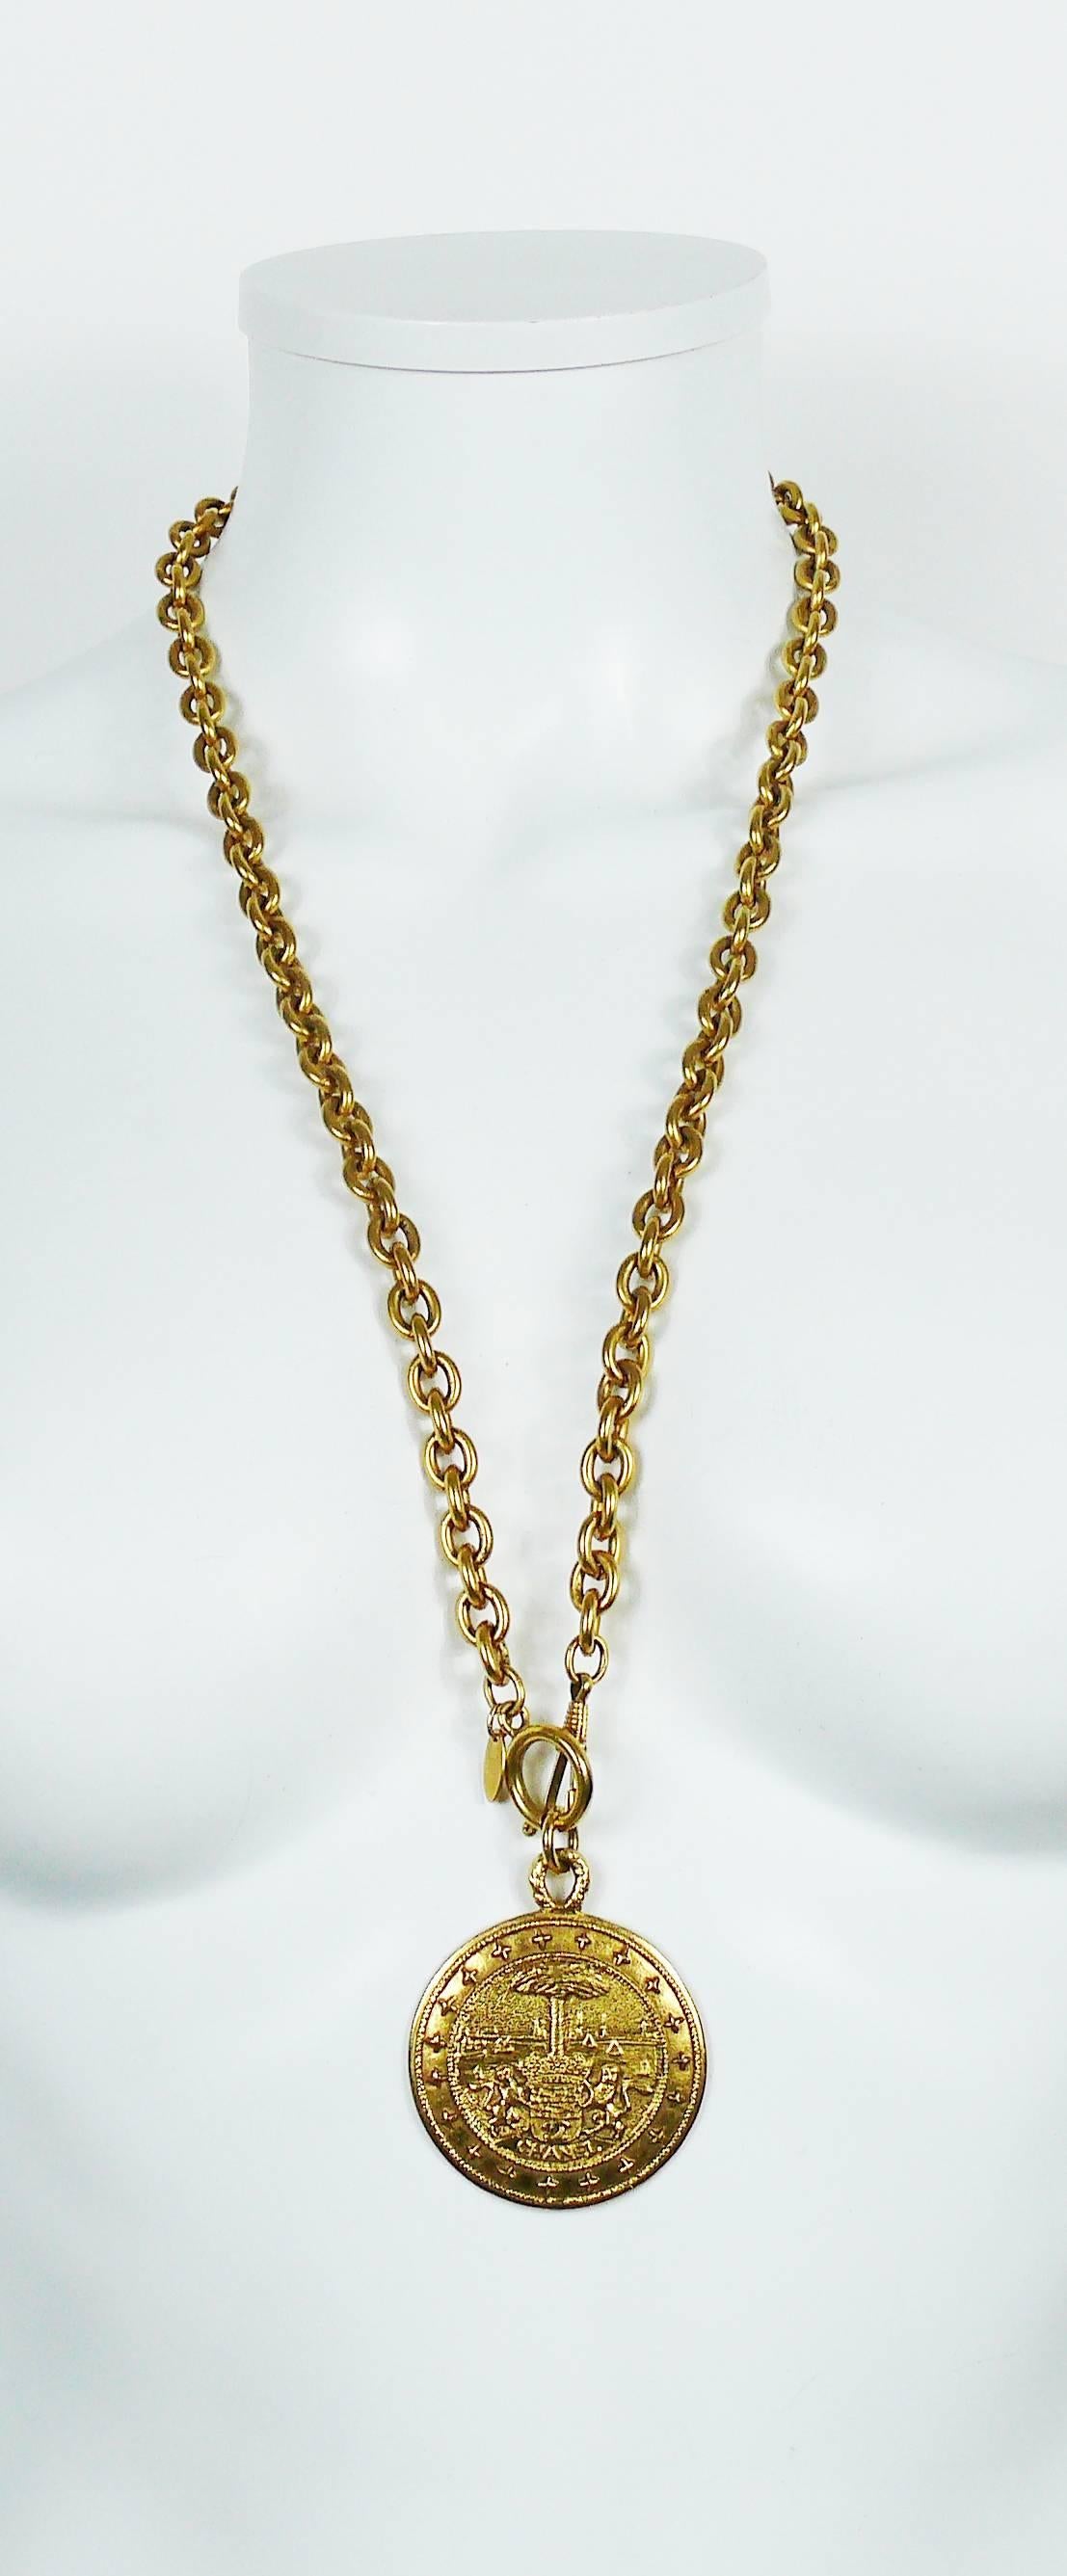 CHANEL vintage gold toned necklace featuring a coat of arm medallion pendant and a bold link chain.

Spring clasp closure.

Embossed CHANEL Made in France.
Private sale "S" engraved on the reverse of the pendant (invisible when